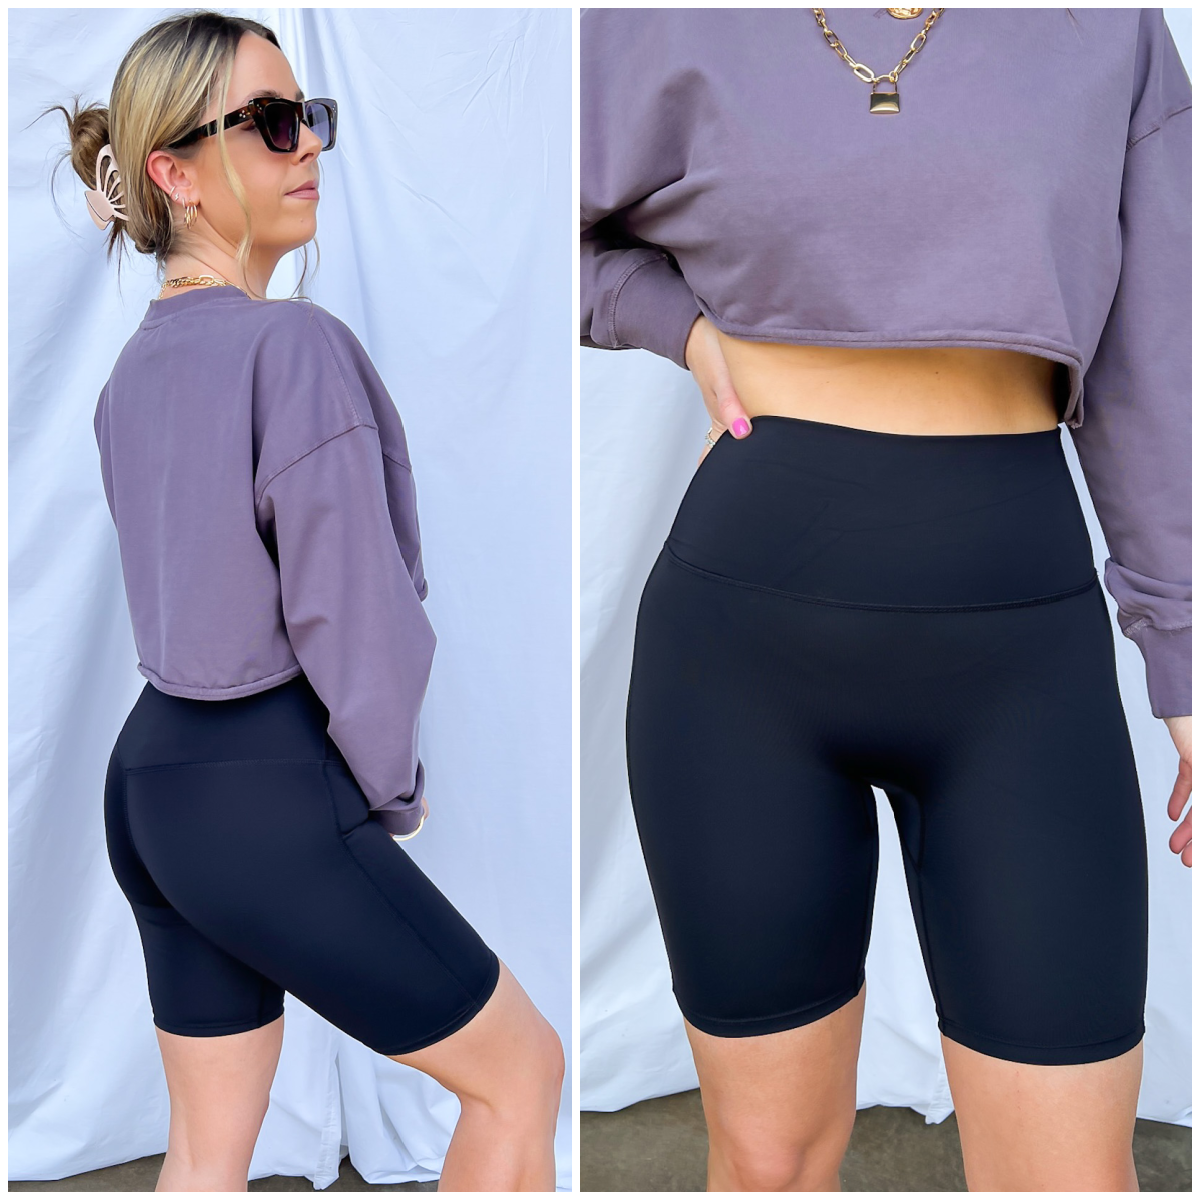  Amped Up Athletic High Waist Biker Shorts - BACK IN STOCK - Madison and Mallory